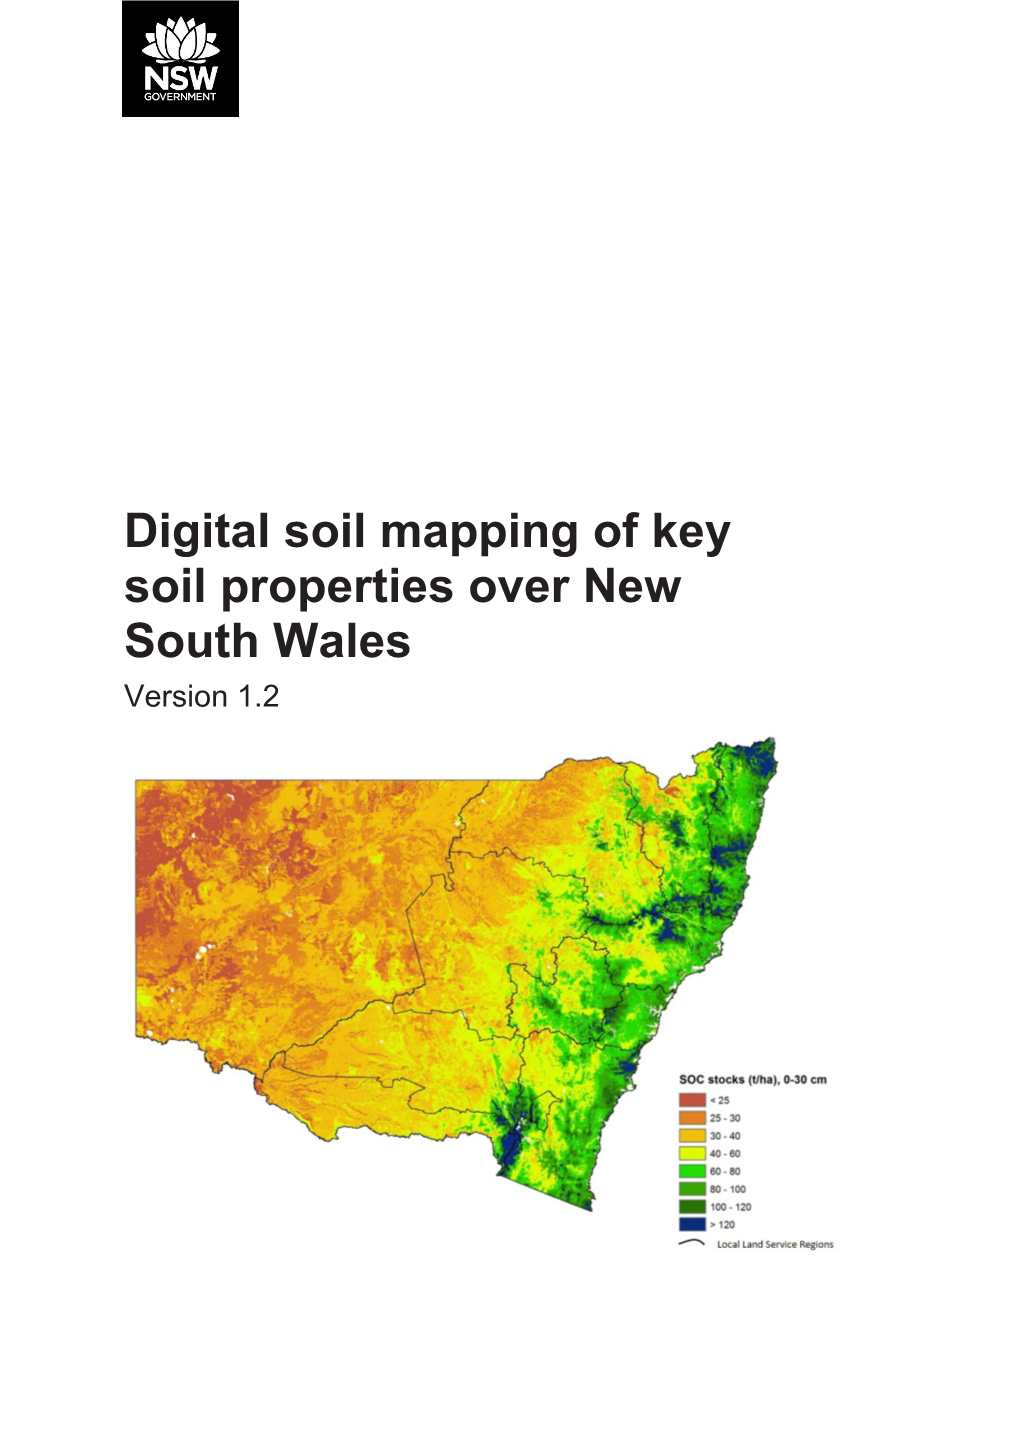 Digital Soil Mapping of Key Soil Properties Over New South Wales Version 1.2